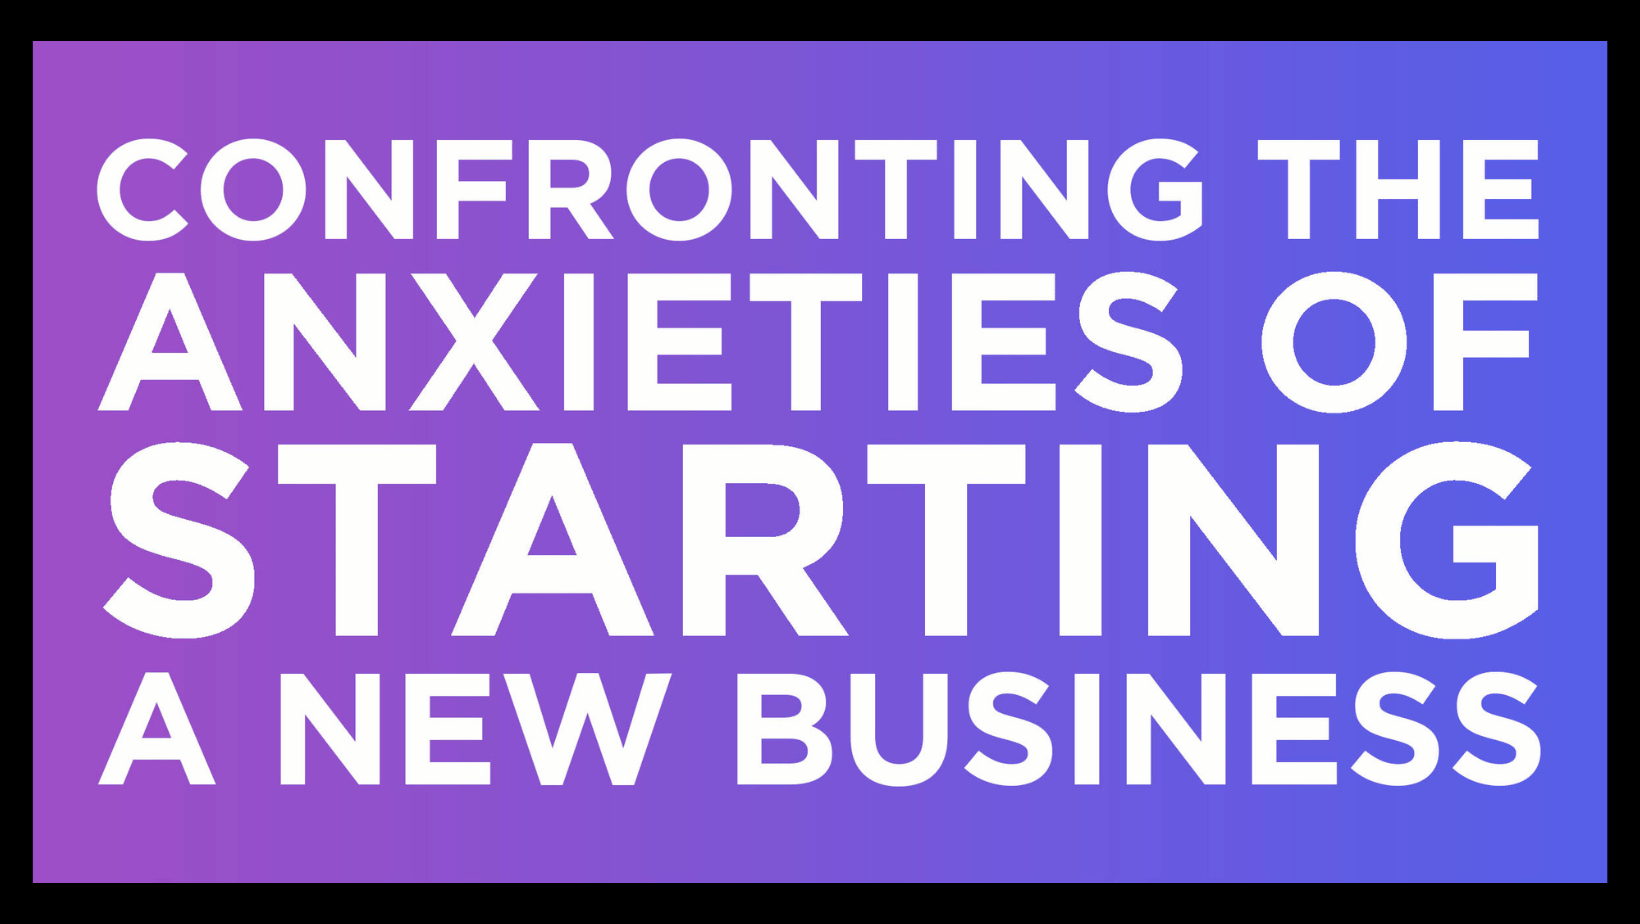 INFOGRAPHIC: Confronting the Anxieties of Starting a New Business